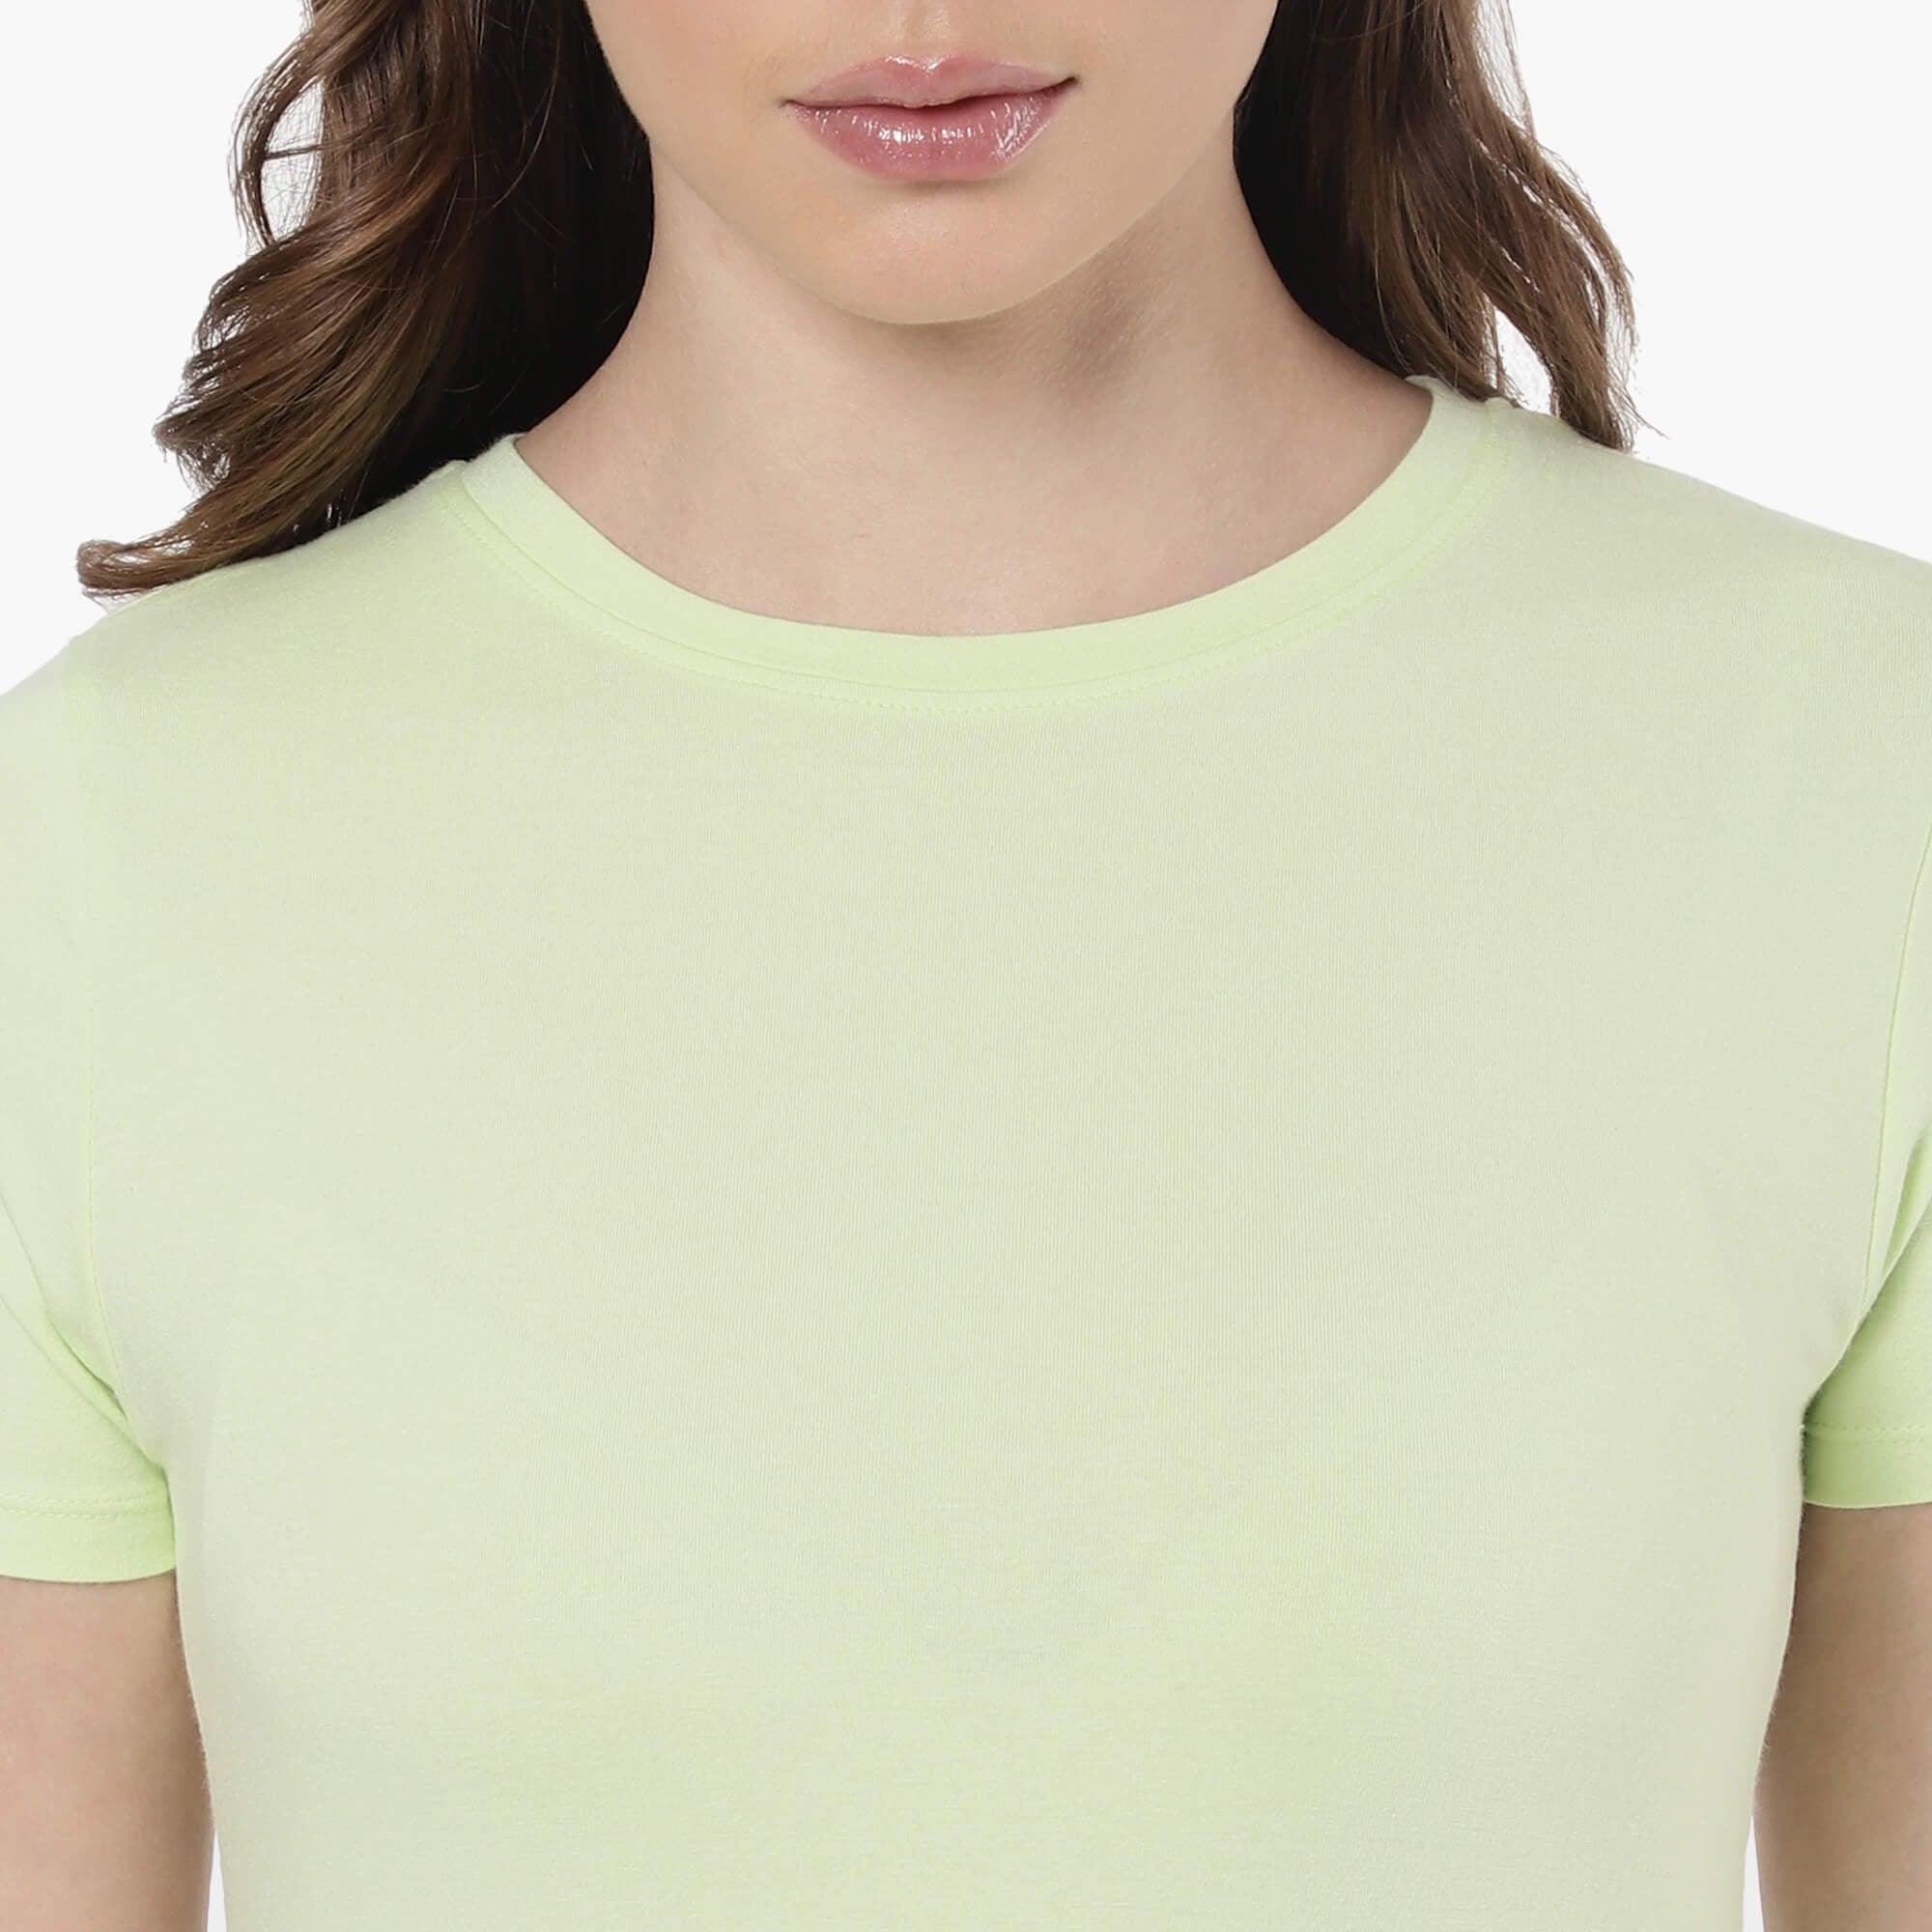 Lime Green Solid T Shirt for Women